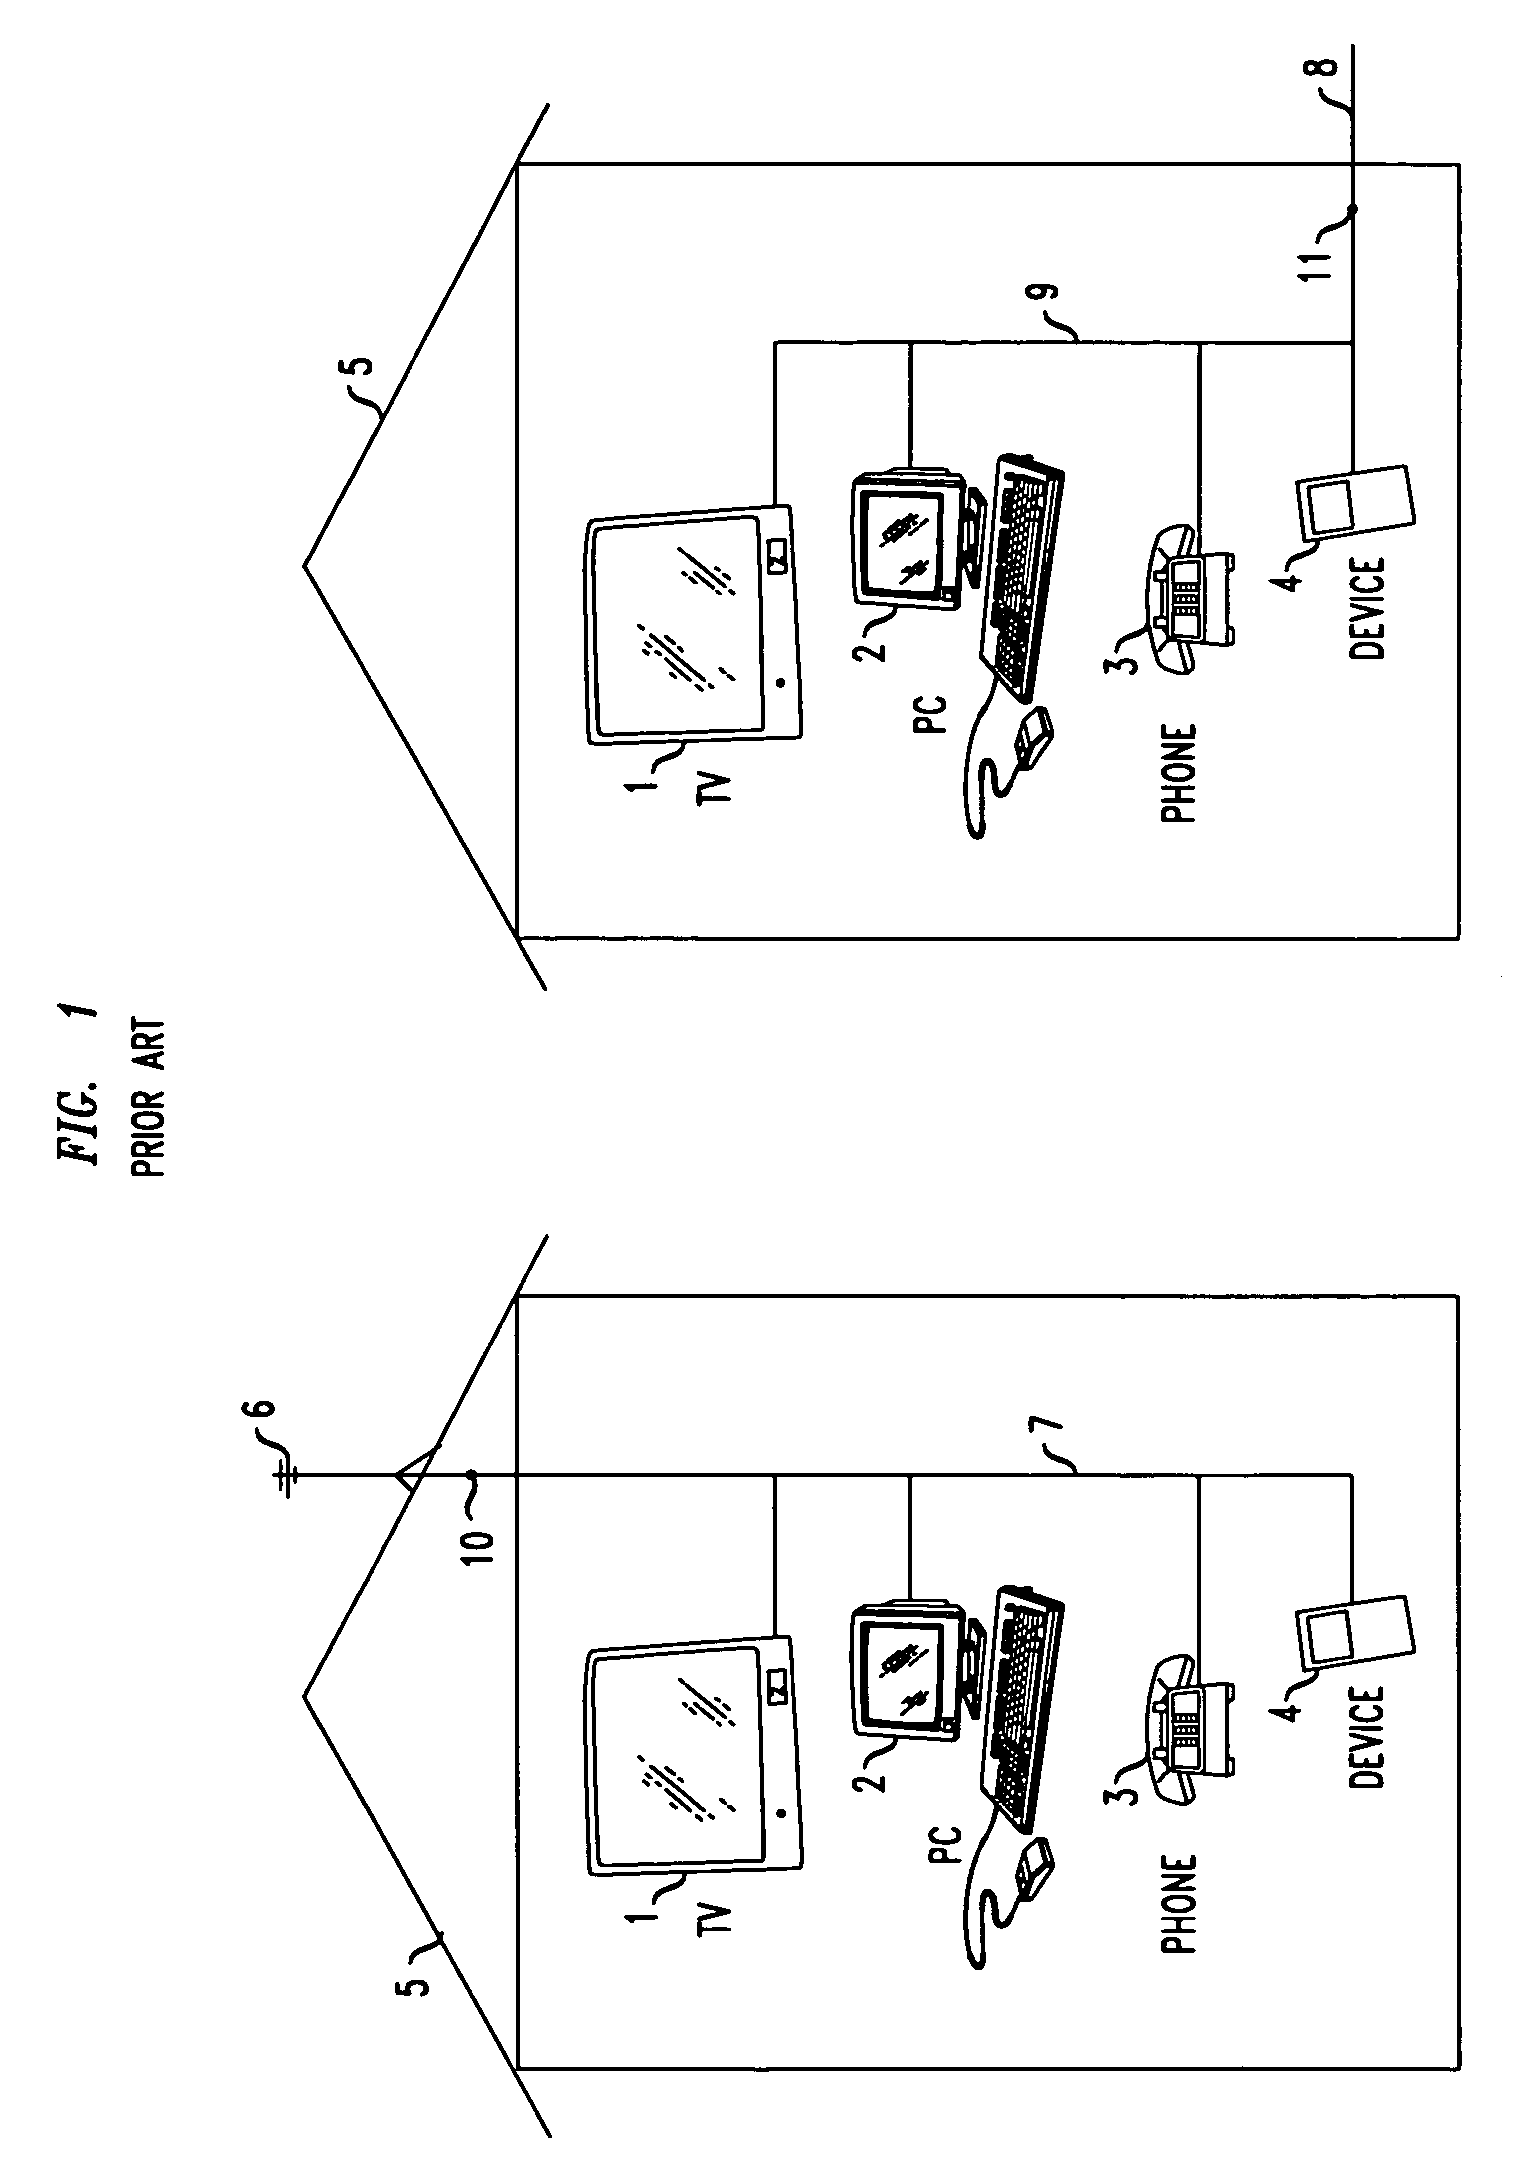 Method and apparatus for a fixed wireless broadband access and wireless LAN integration